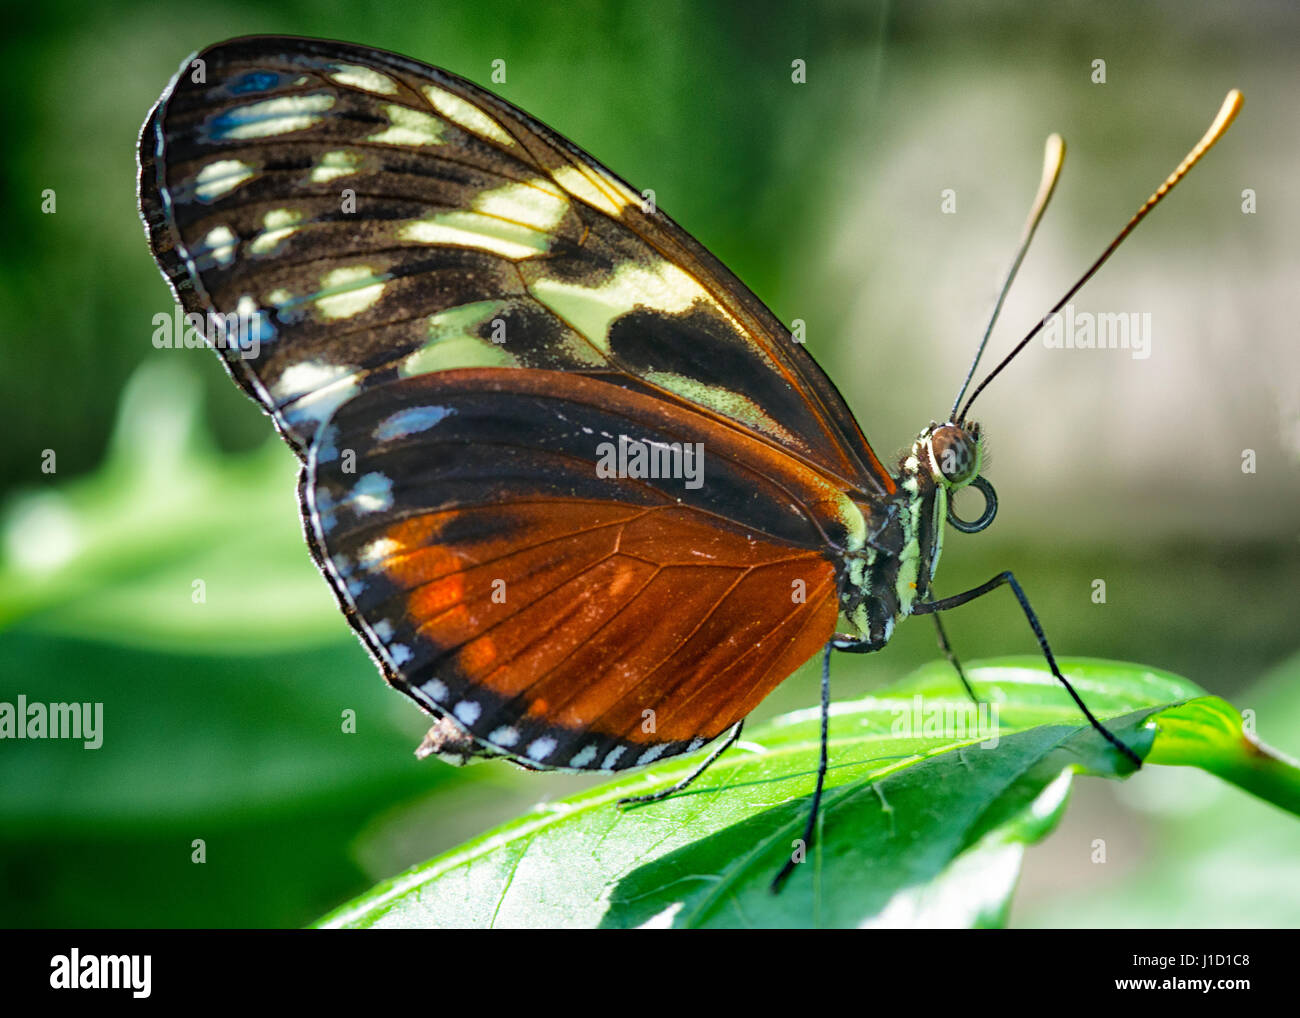 This on a leaf sitting butterfly has several names:Tiger Longwing, Golden Longwing, Hecale Longwing  or Golden Heliconian (Heliconius hecale) . It is a Heliconiid butterfly that occurs from Mexico to the Peruvian Amazon. Stock Photo